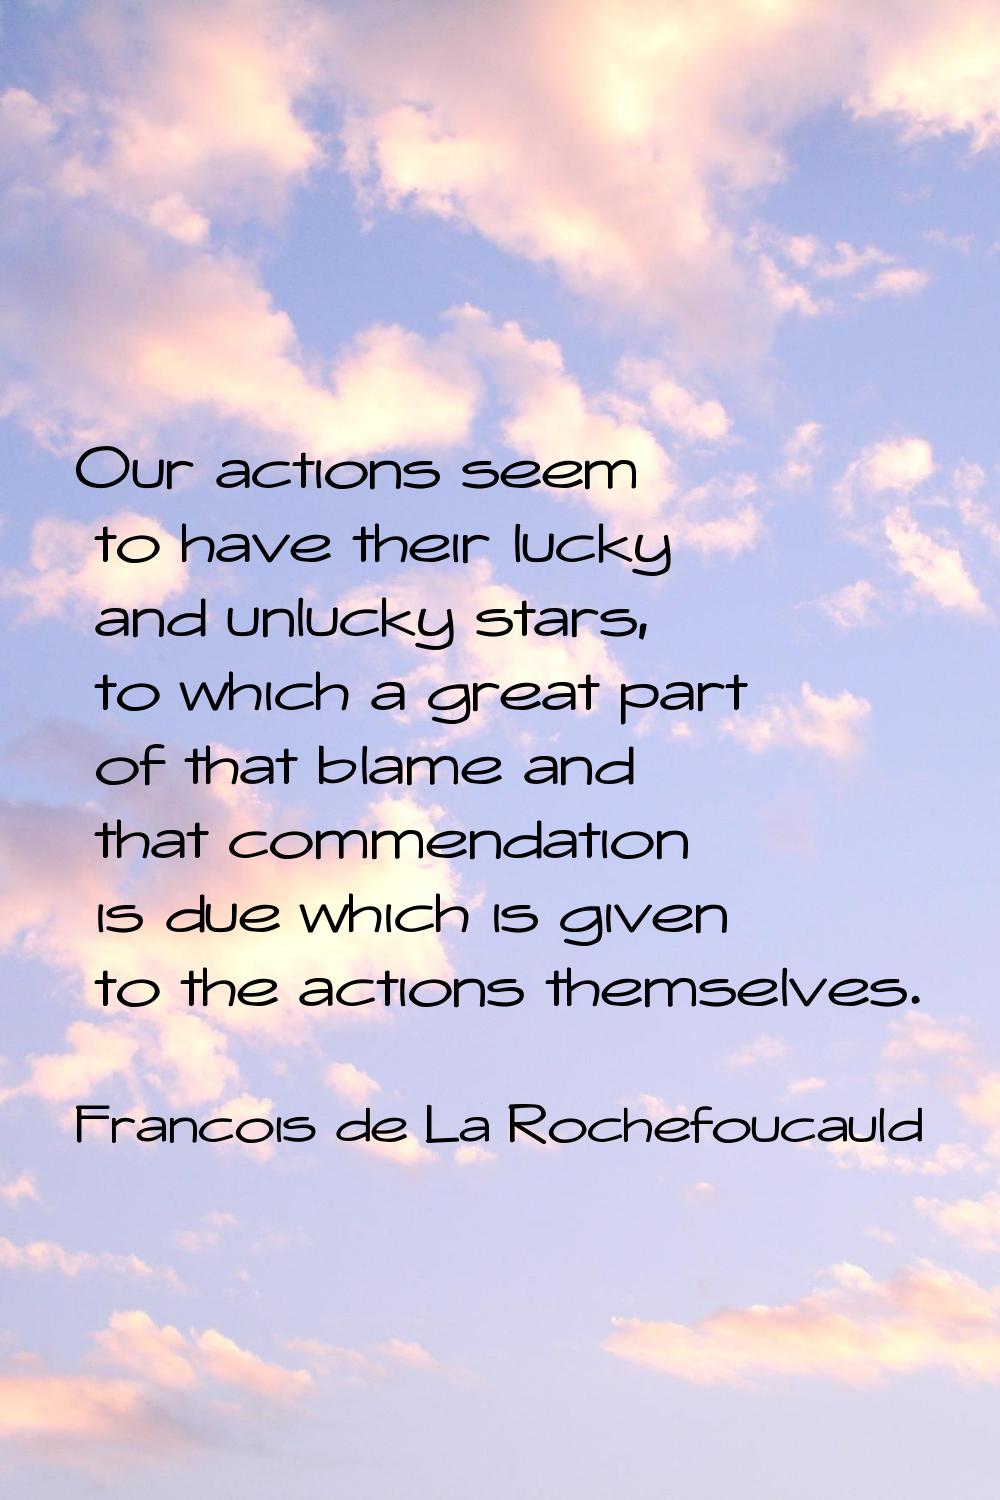 Our actions seem to have their lucky and unlucky stars, to which a great part of that blame and tha